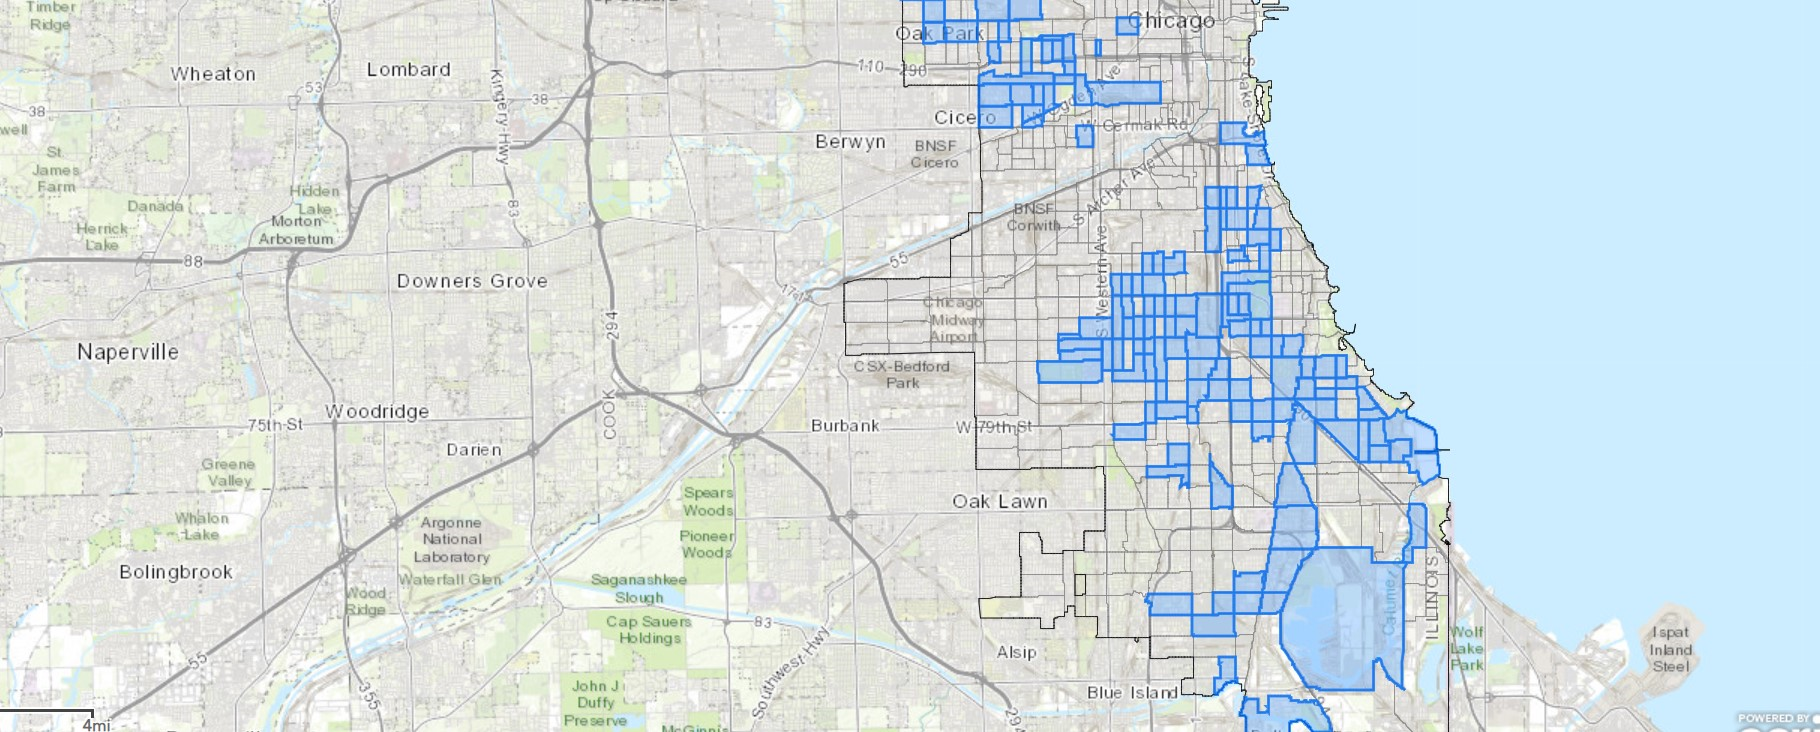 A map of Designated Opportunity Zones in the Chicagoland area.